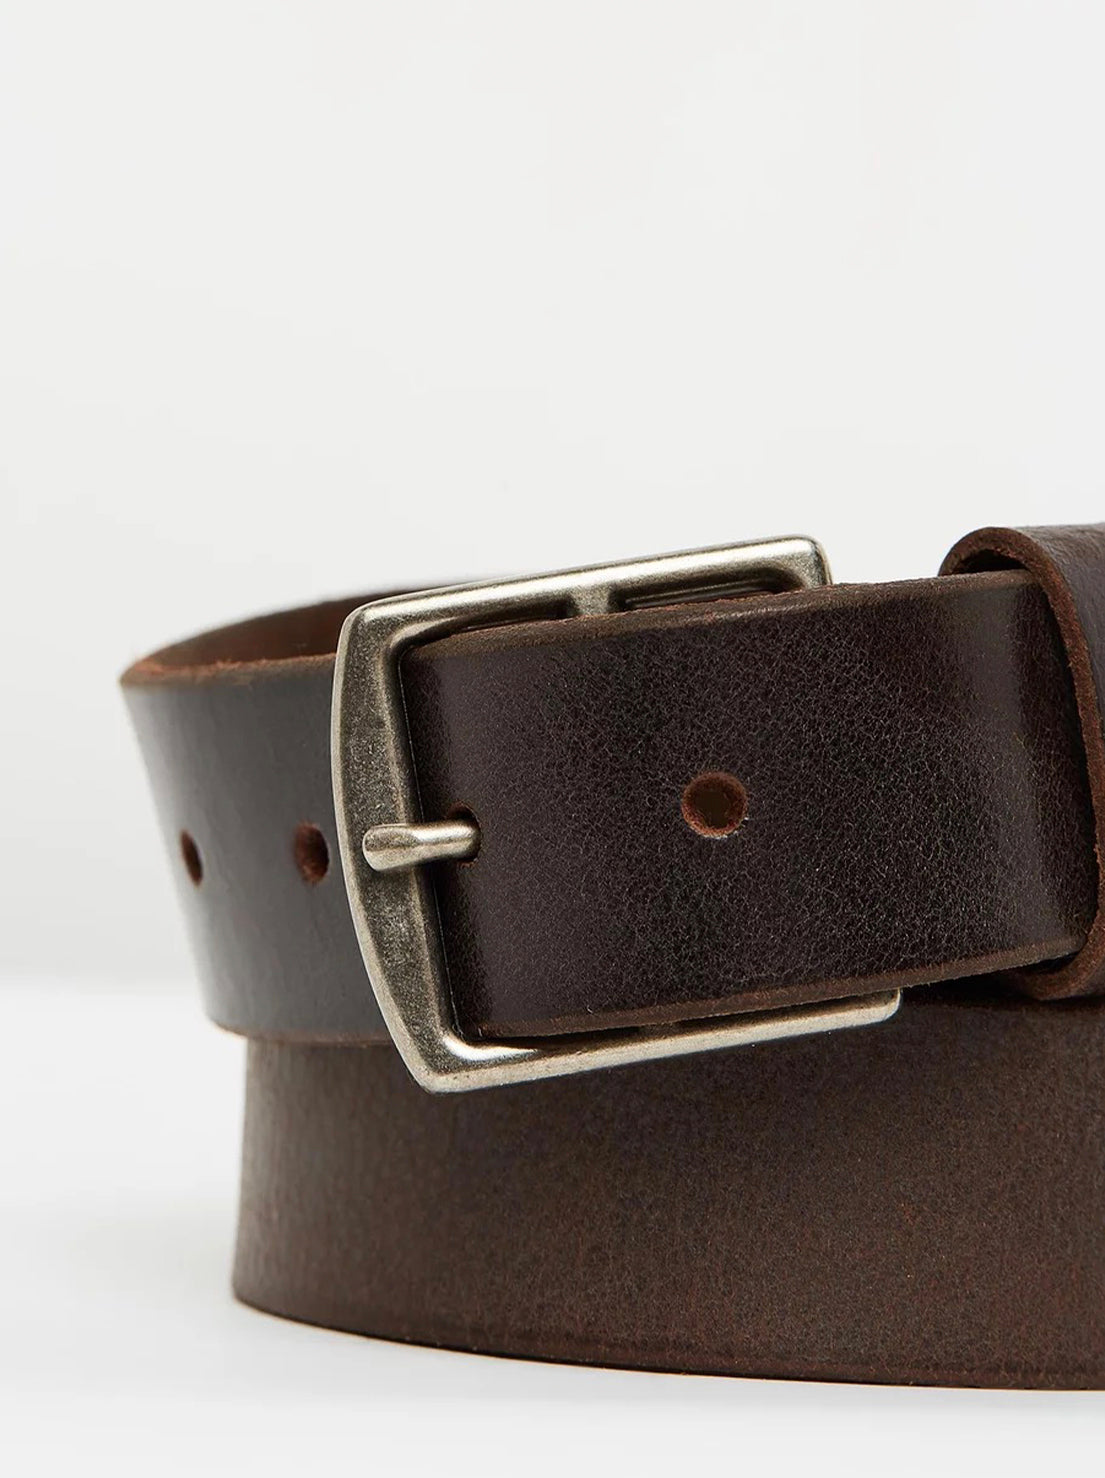 Loop Leather - State Route Belt - Chocolate